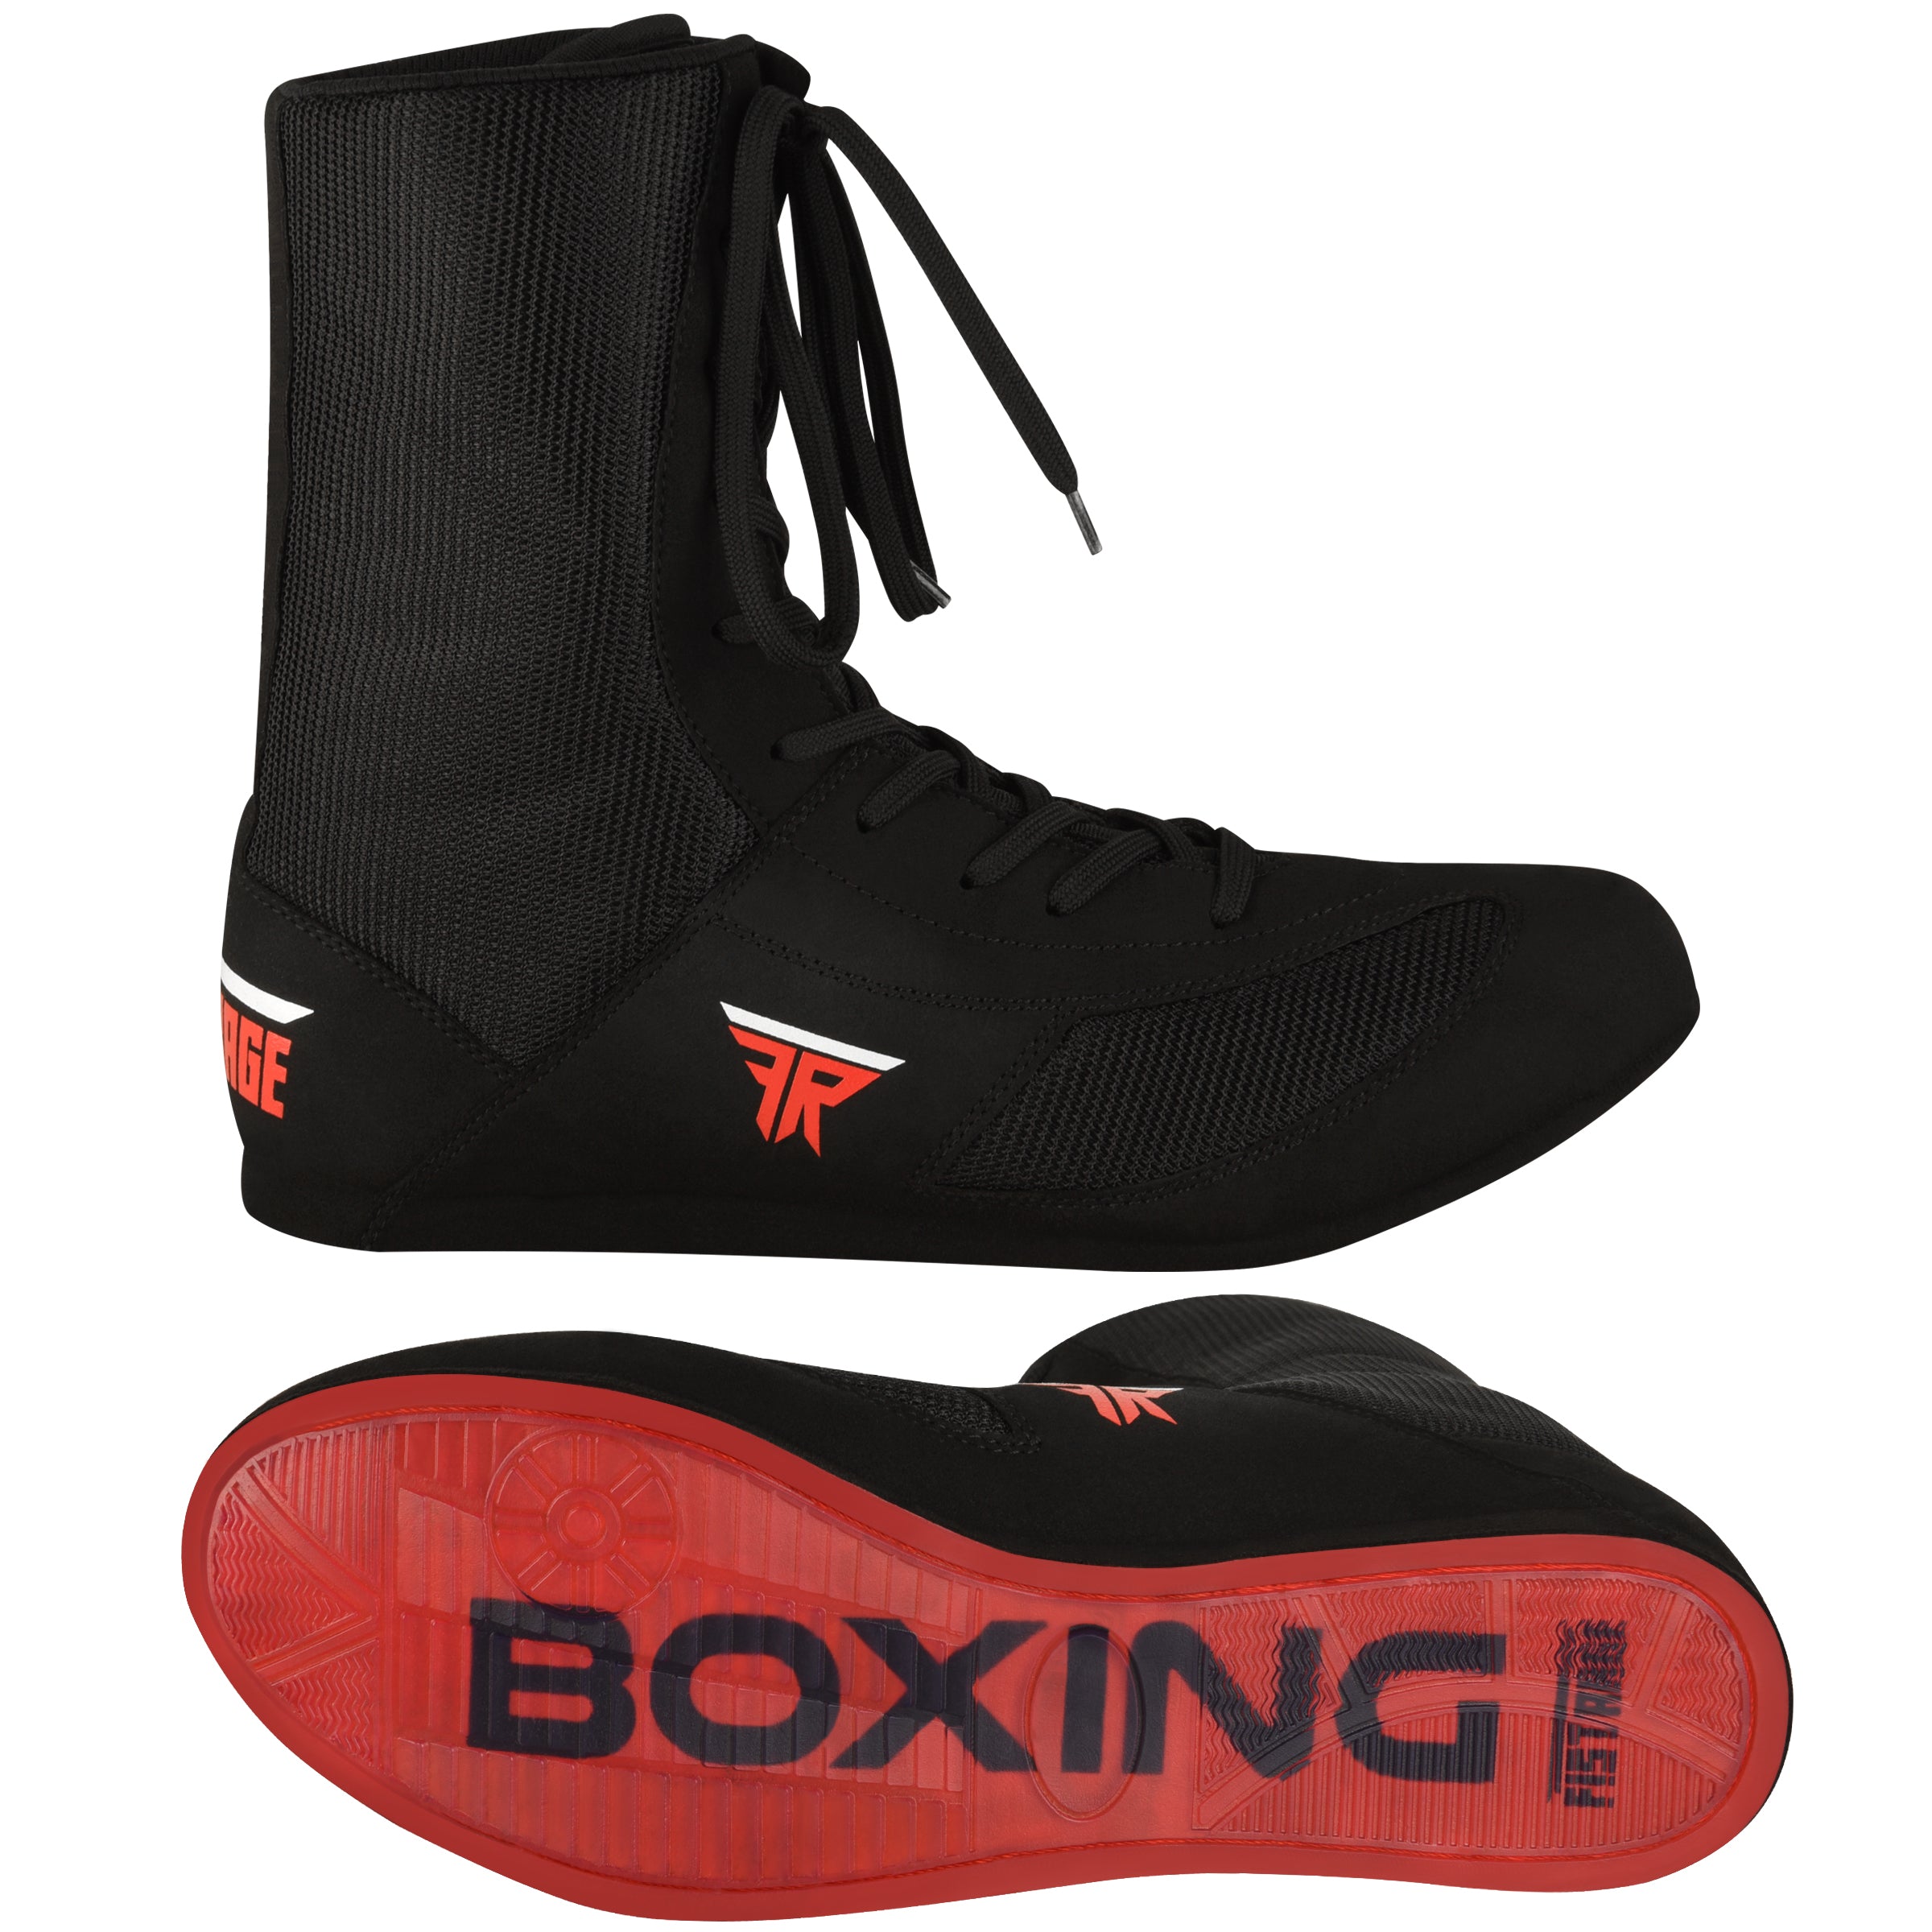 FISTRAGE HIGH TOP BOXING SHOES - image 1 of 7